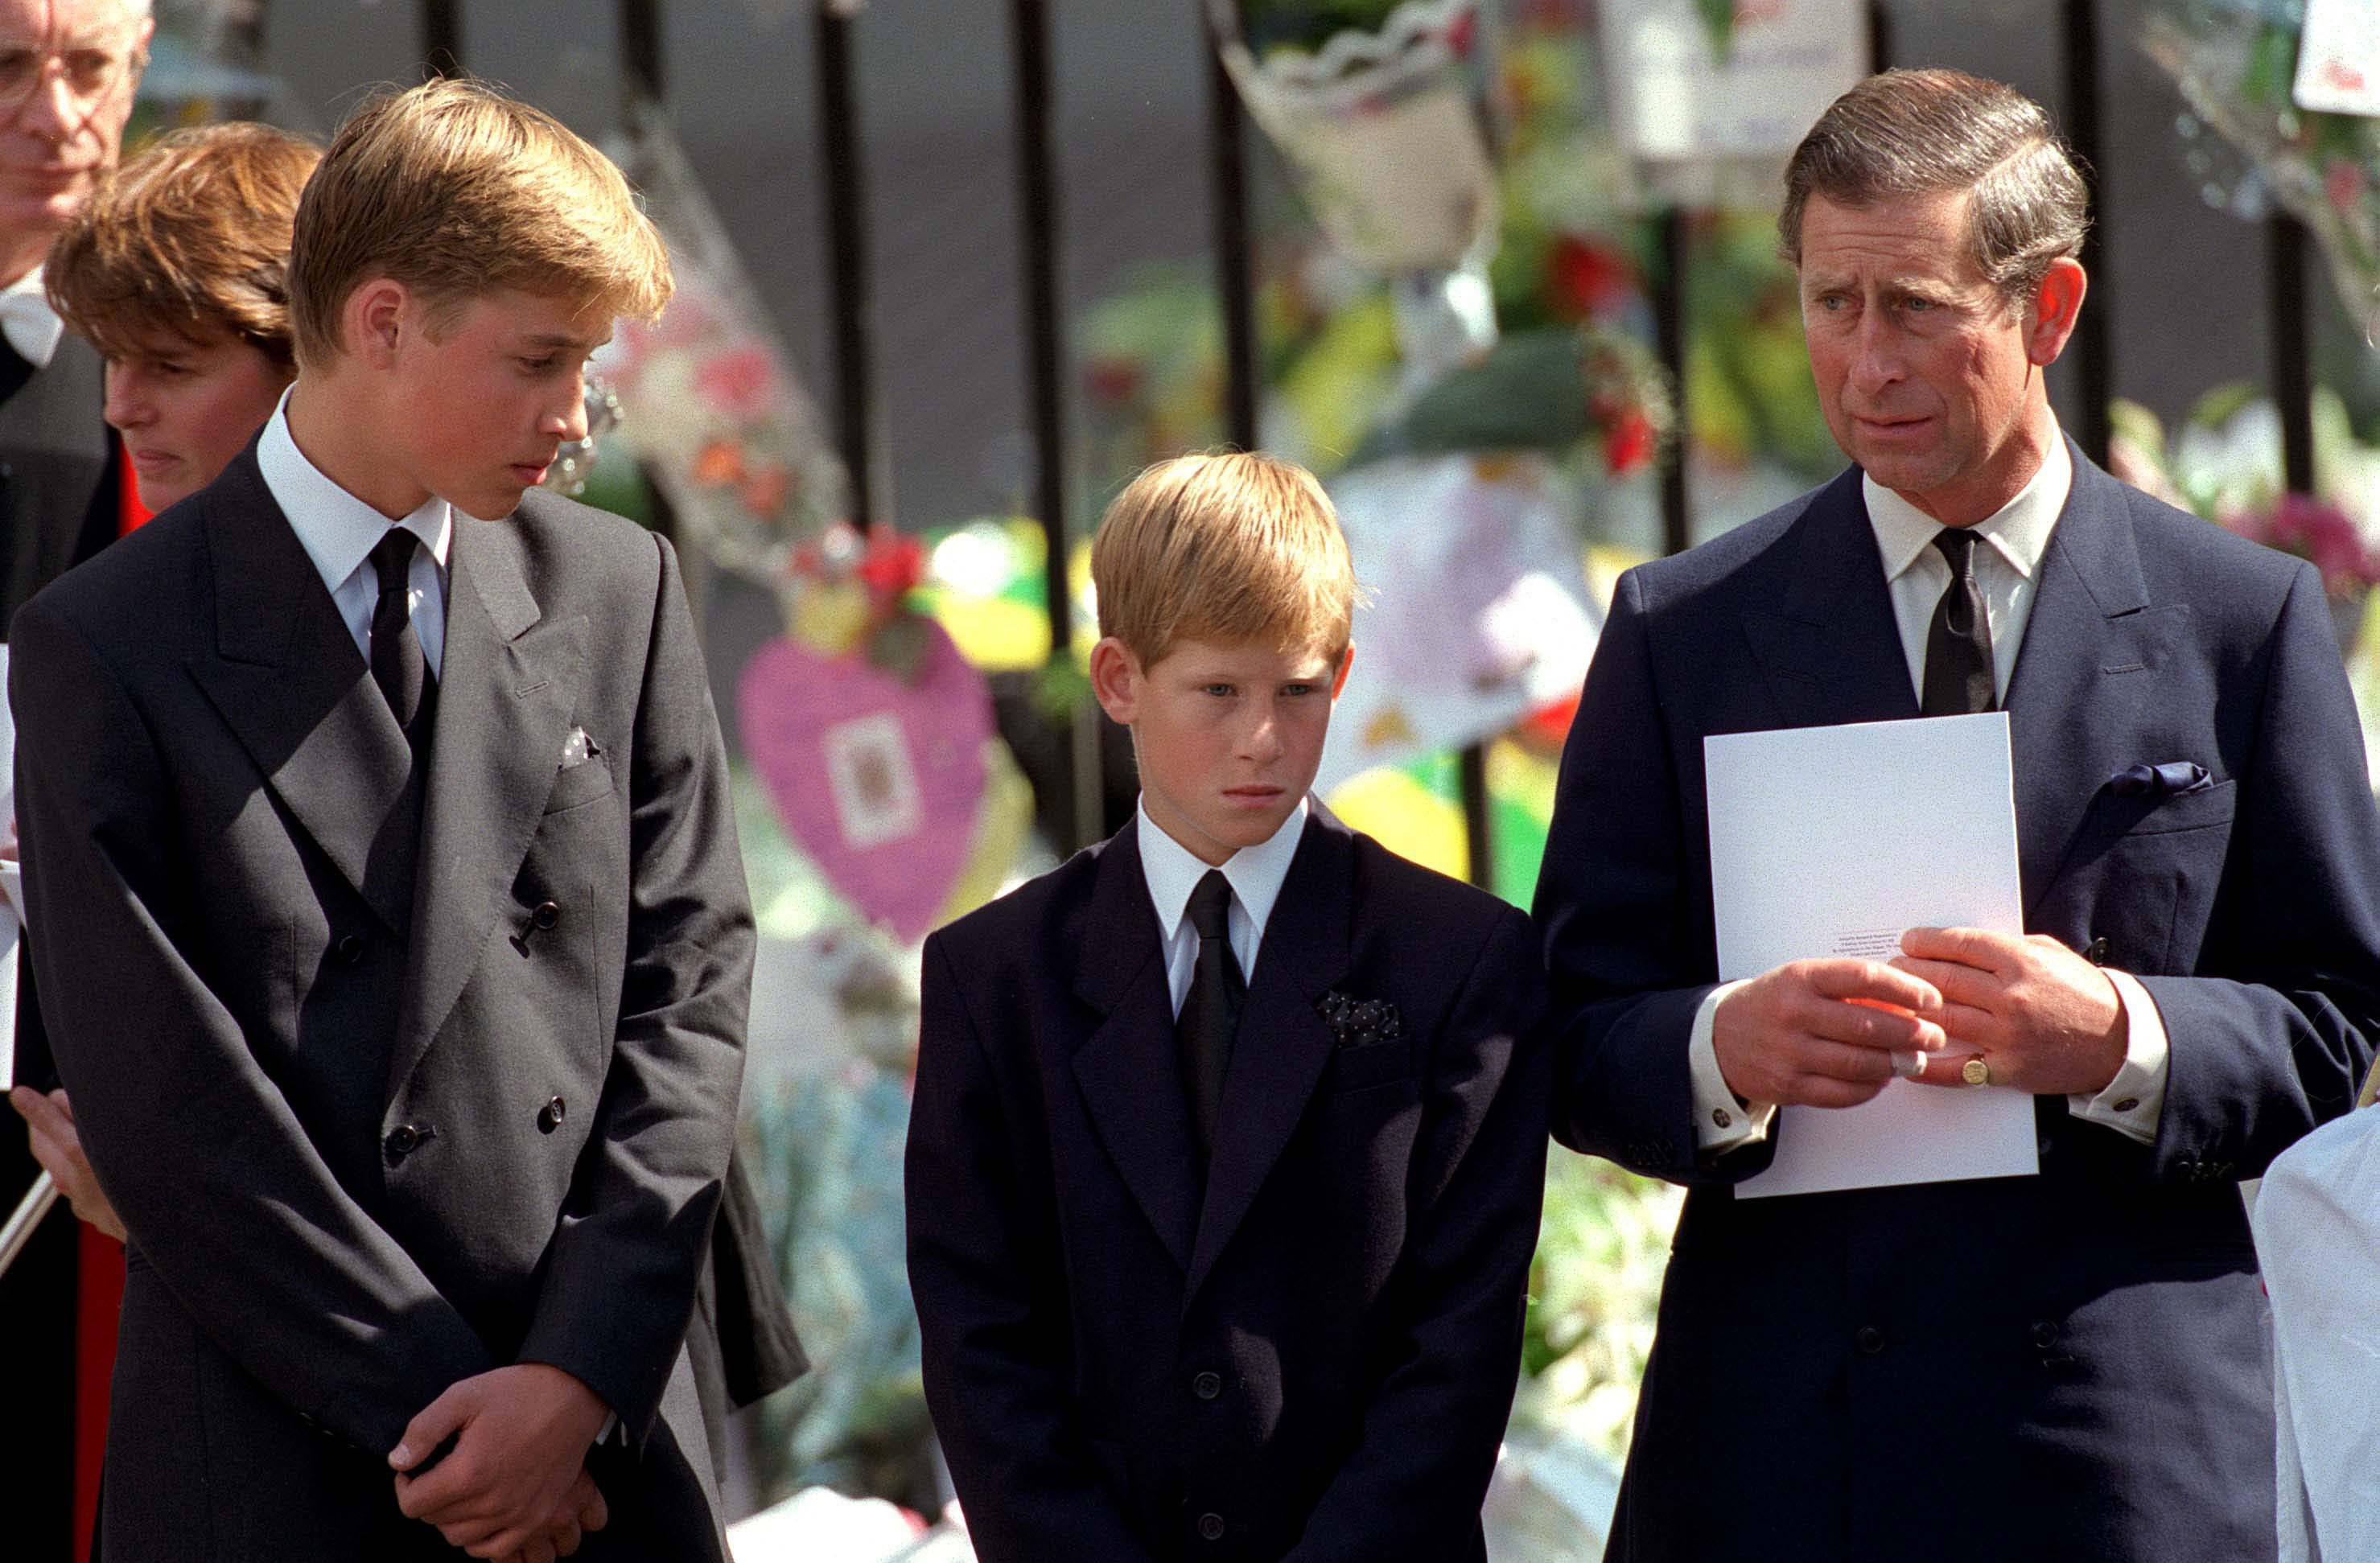 The Prince of Wales with Prince William and Prince Harry outside Westminster Abbey at the funeral of Diana, Princess of Wales on September 6, 1997 | Source: Getty Images 